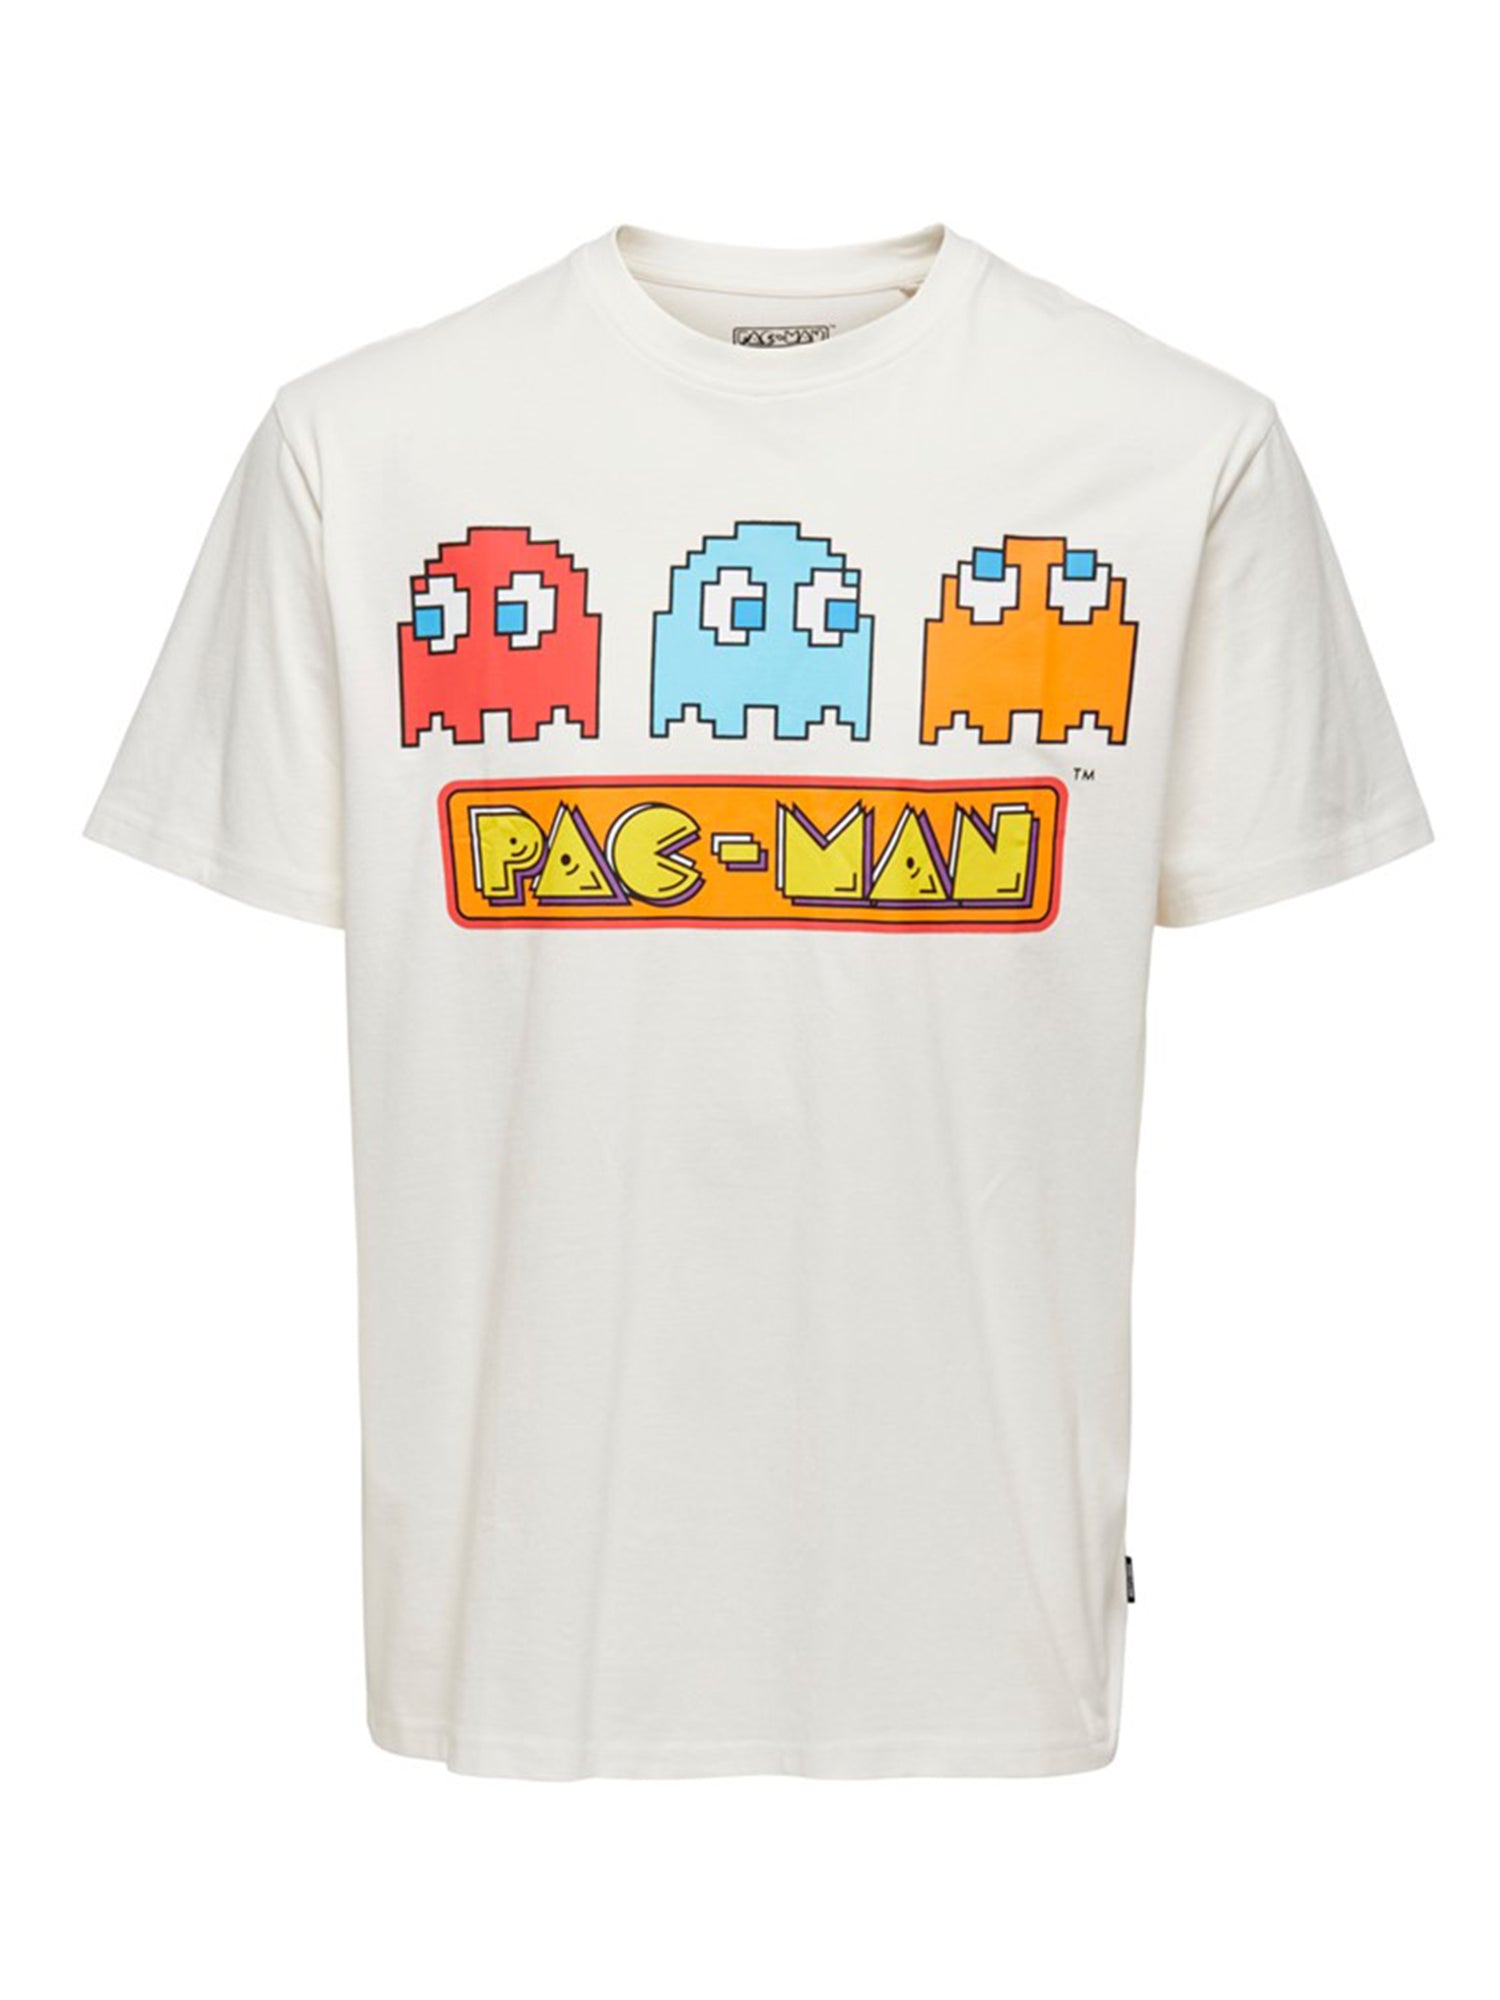 ONLY&SONS T-SHIRT PACMAN BIANCO